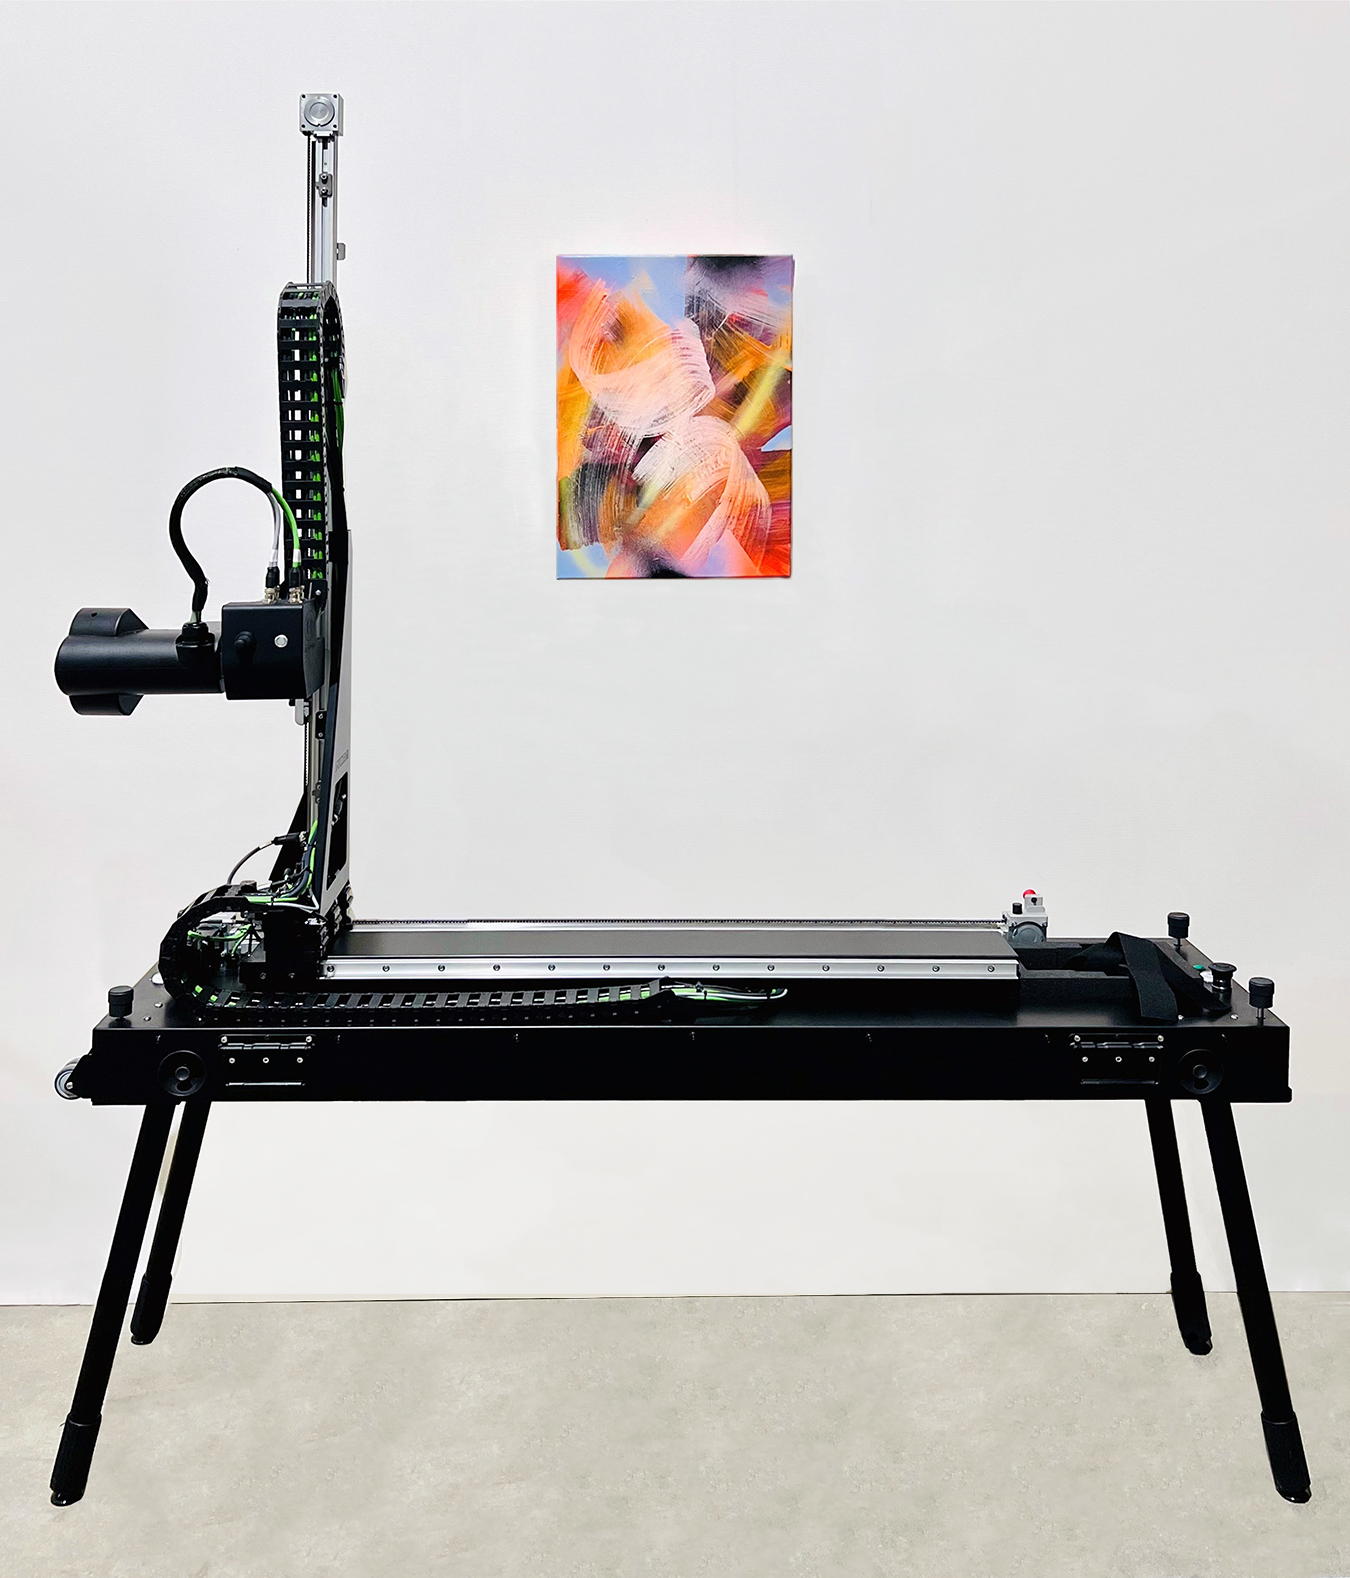 The Artclear scanner